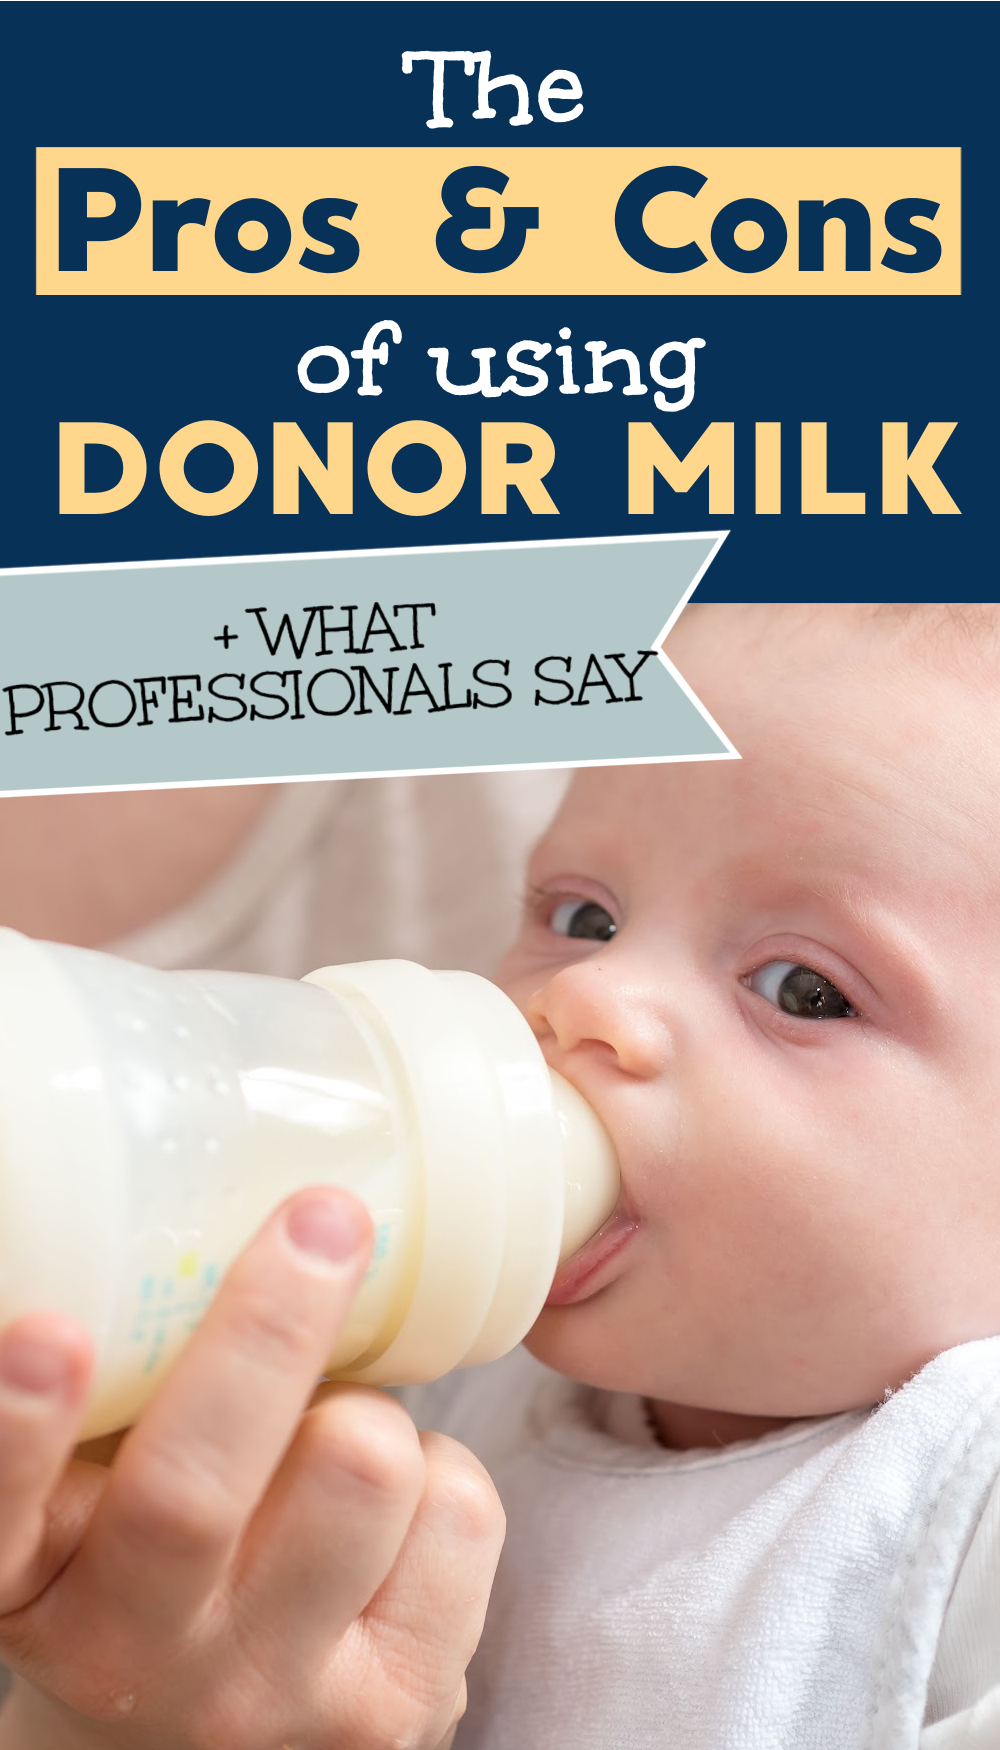 Donor human milk can be a fantastic option for parents around the globe who may not be able to provide any or all breast milk for their children. But is it the right choice for everyone? In this article, you will learn about some donor milk pros and cons to help you make the best decision for your family.